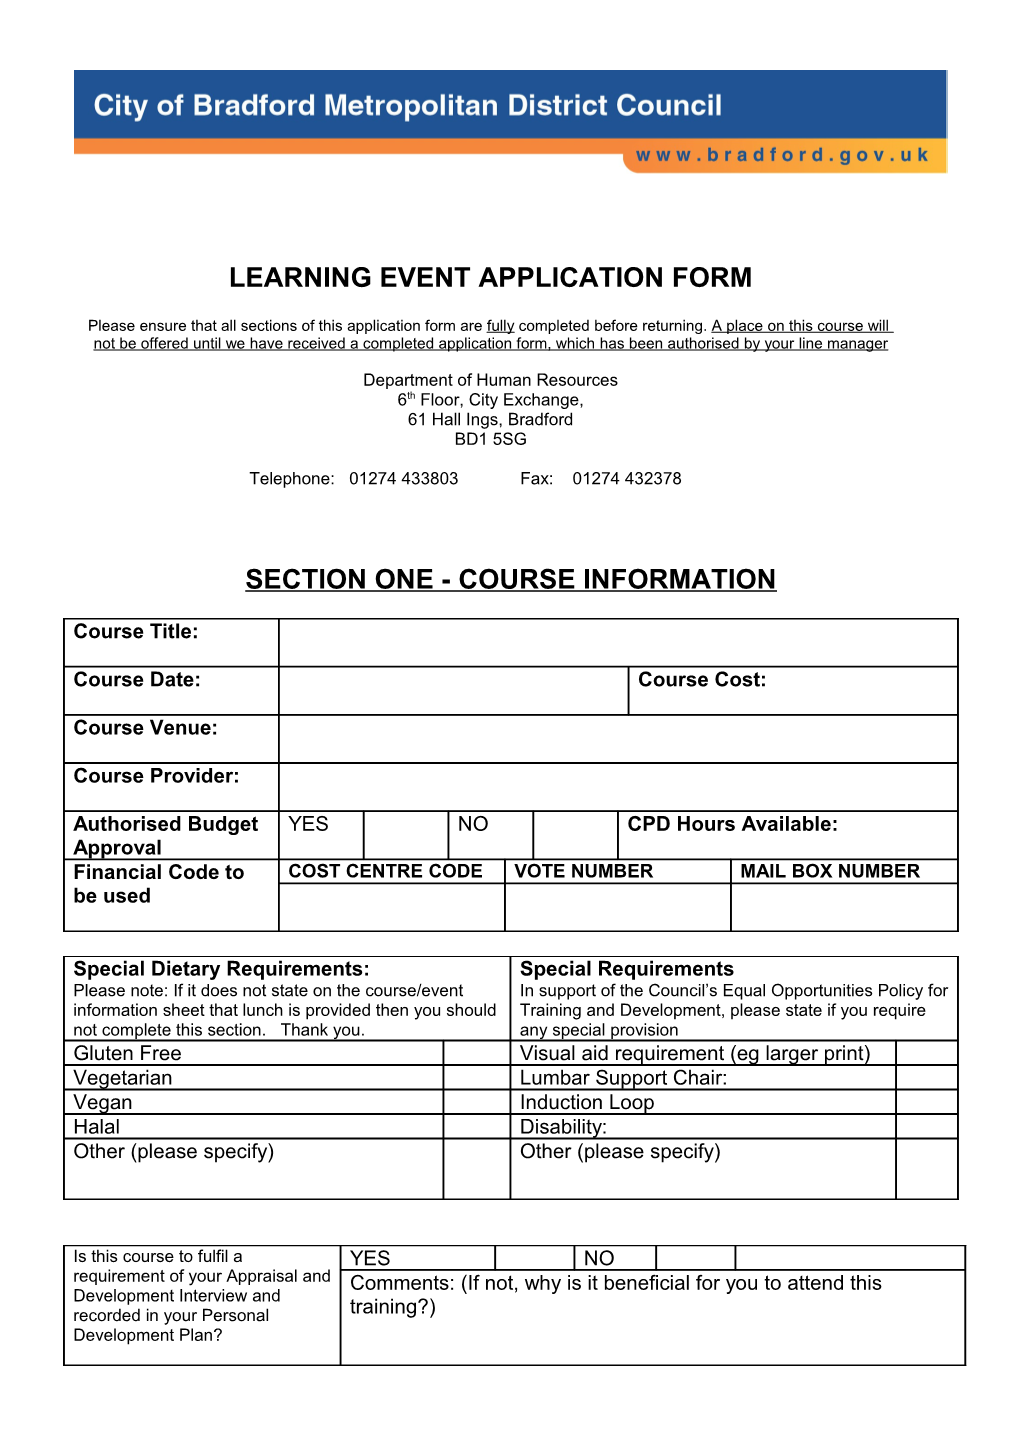 Learning Event Application Form